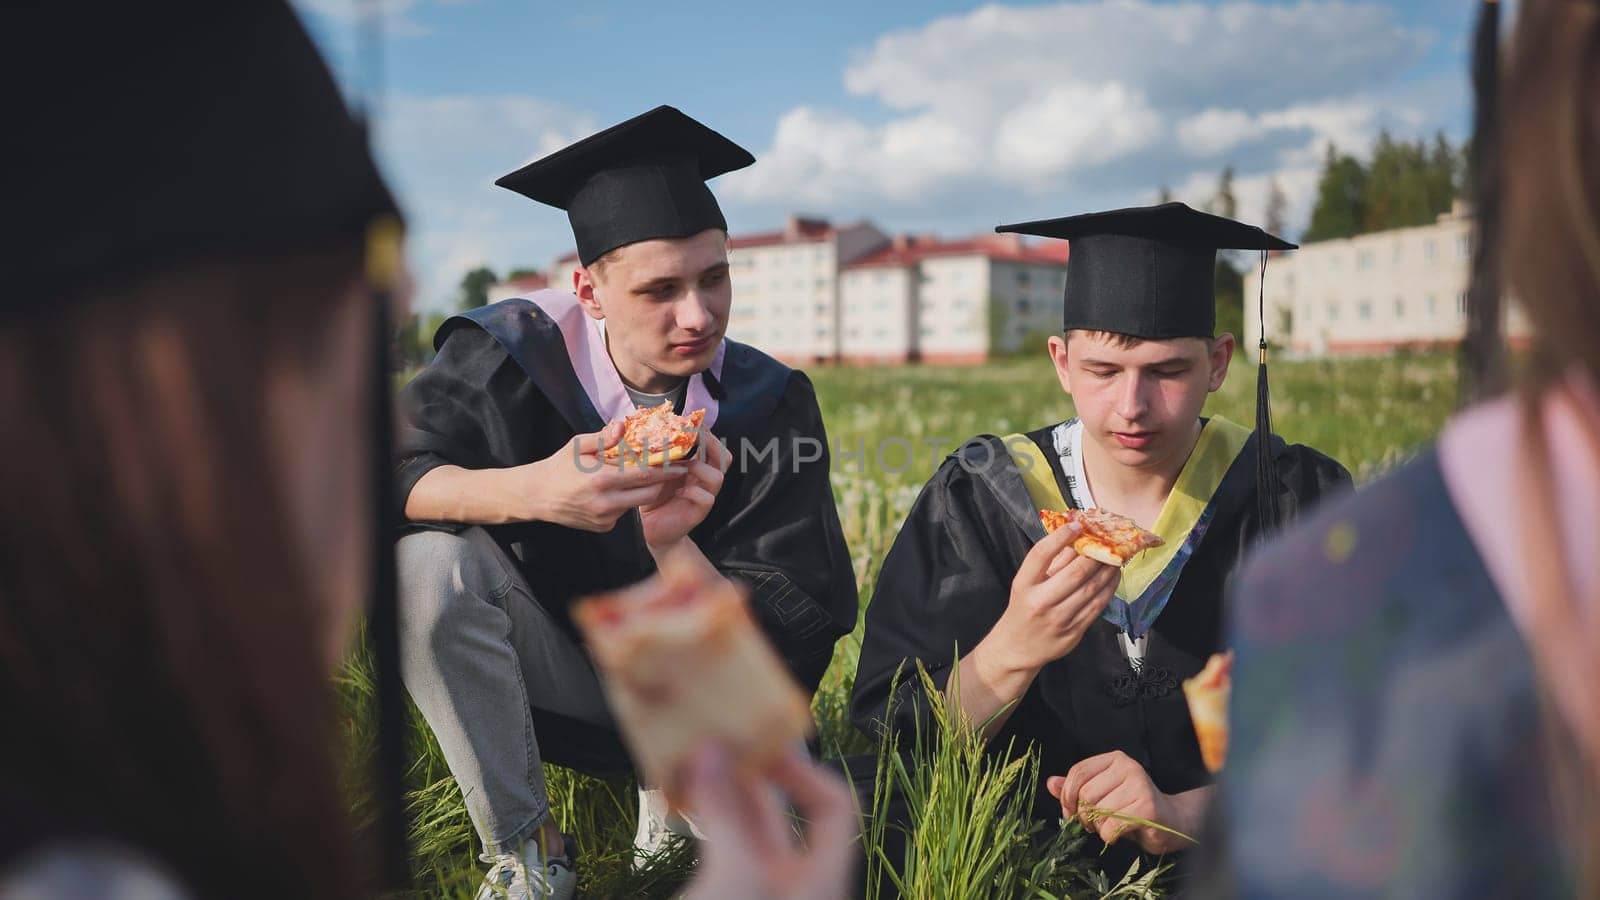 Graduates in black suits eating pizza in a city meadow. by DovidPro